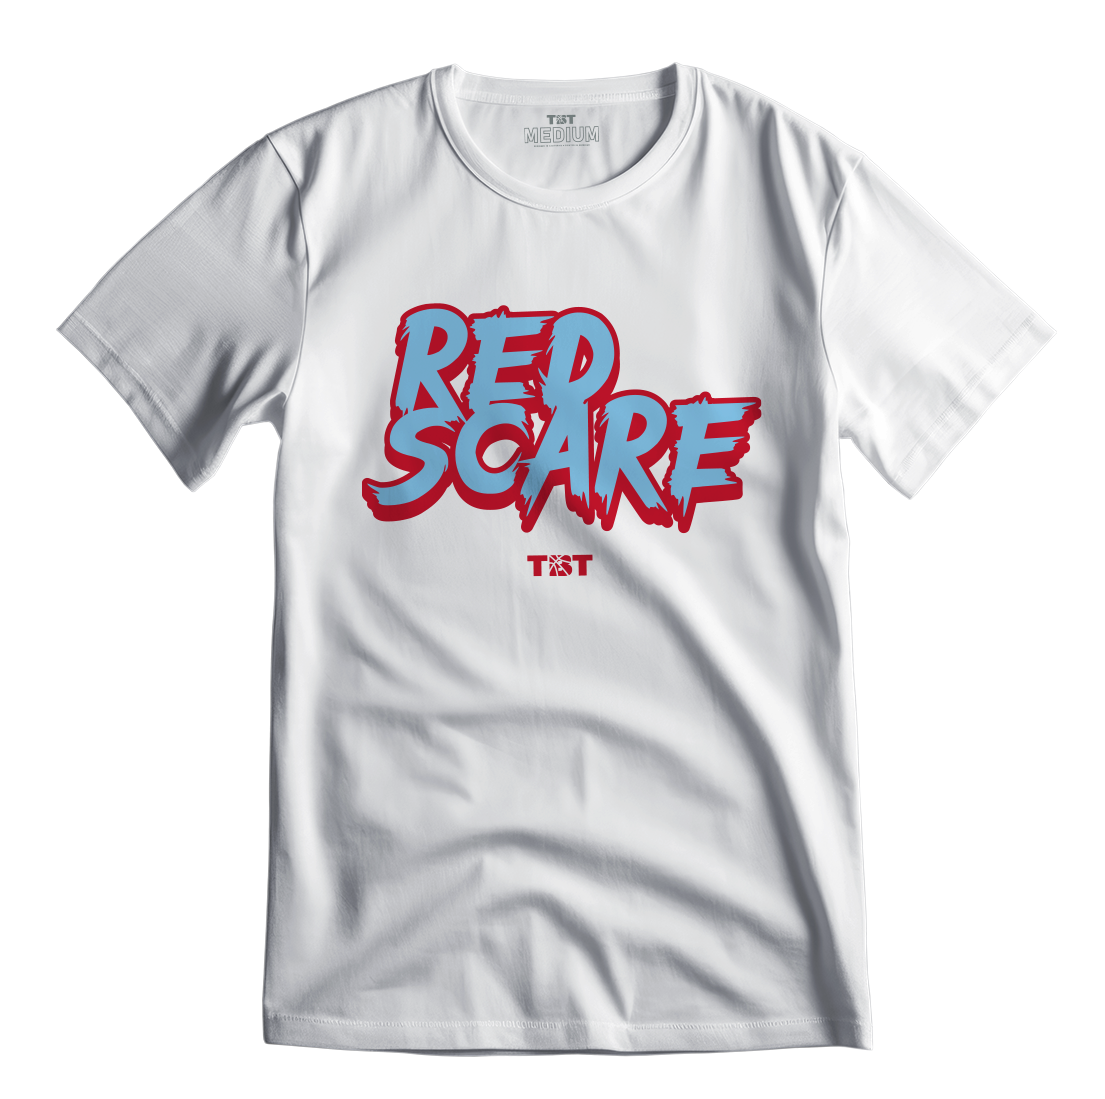 RED SCARE SCRATCH TSHIRT